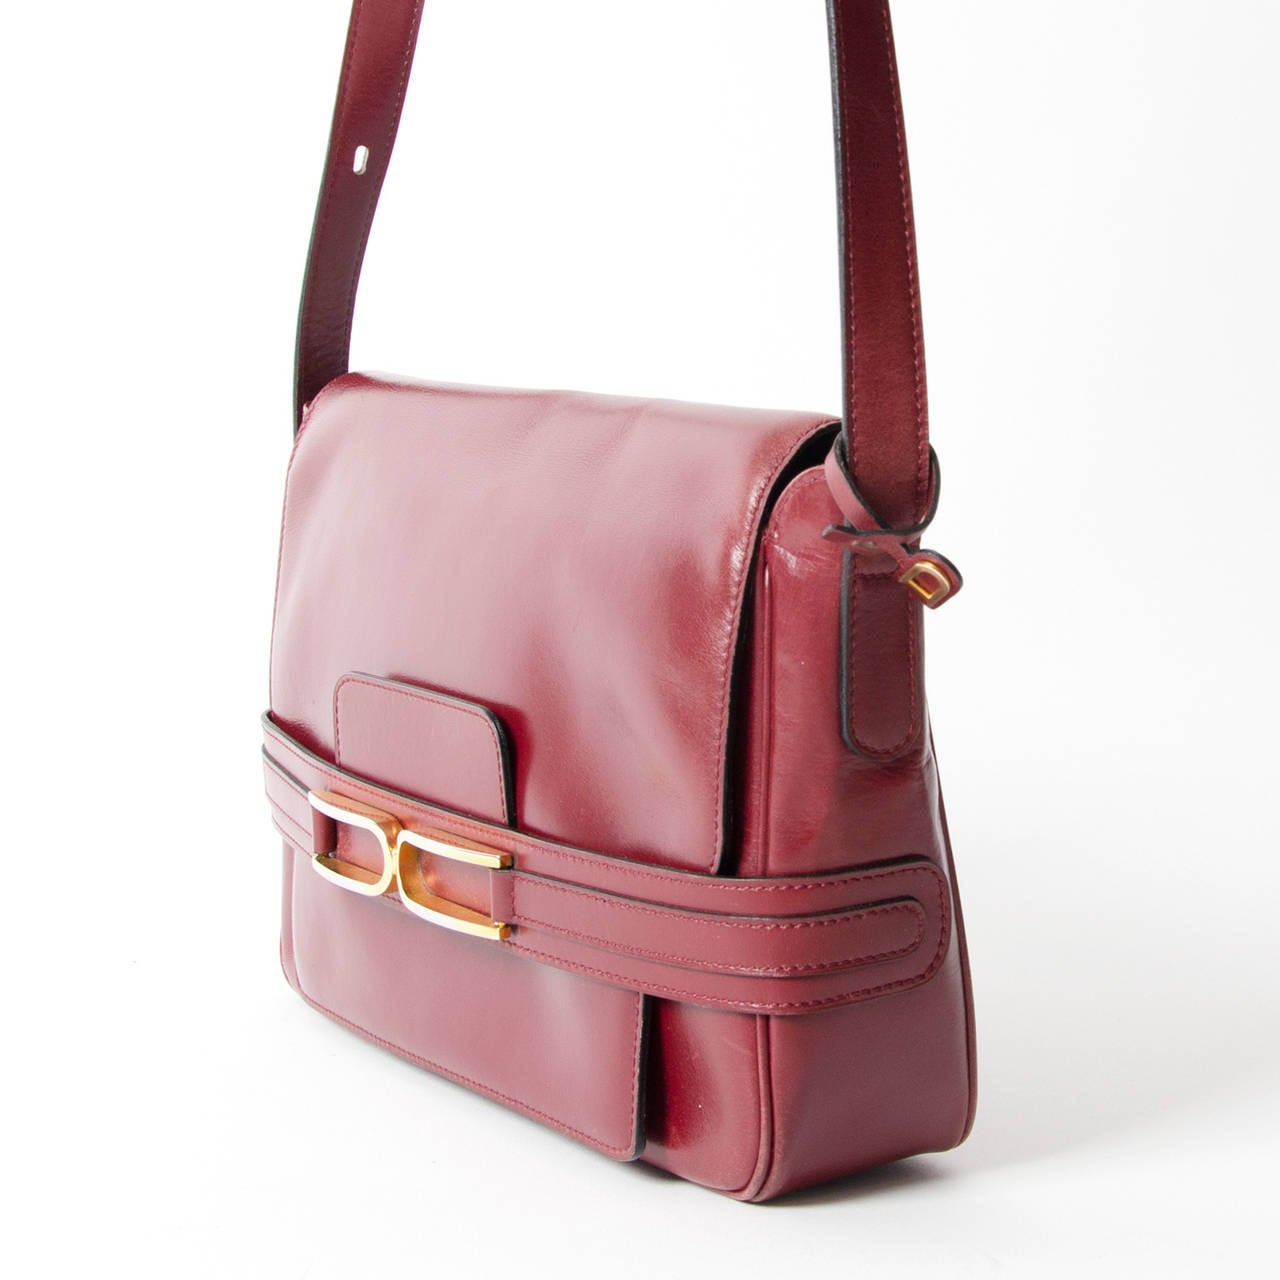 Beautiful Delvaux Bordeaux Shoulder bag with golden DD detail, 
Adjustable shoulderstrap. 
Suede interior lining with one zipper pocket 
Comes with matching mirror .